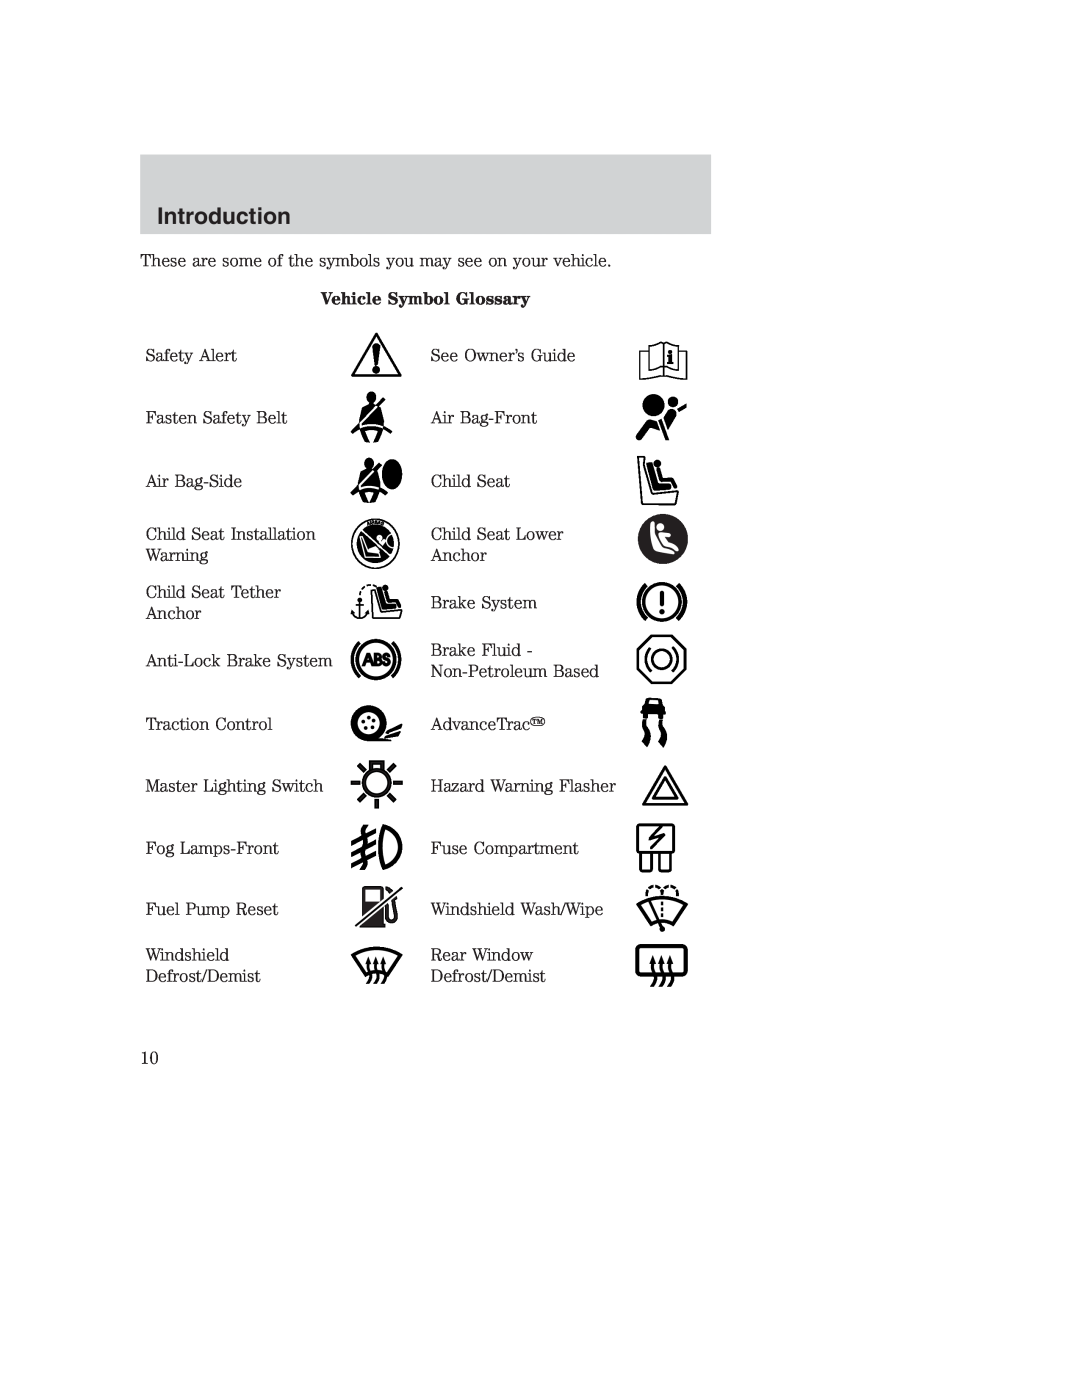 Ford AM/FM stereo manual Vehicle Symbol Glossary, Introduction, Hazard Warning Flasher 